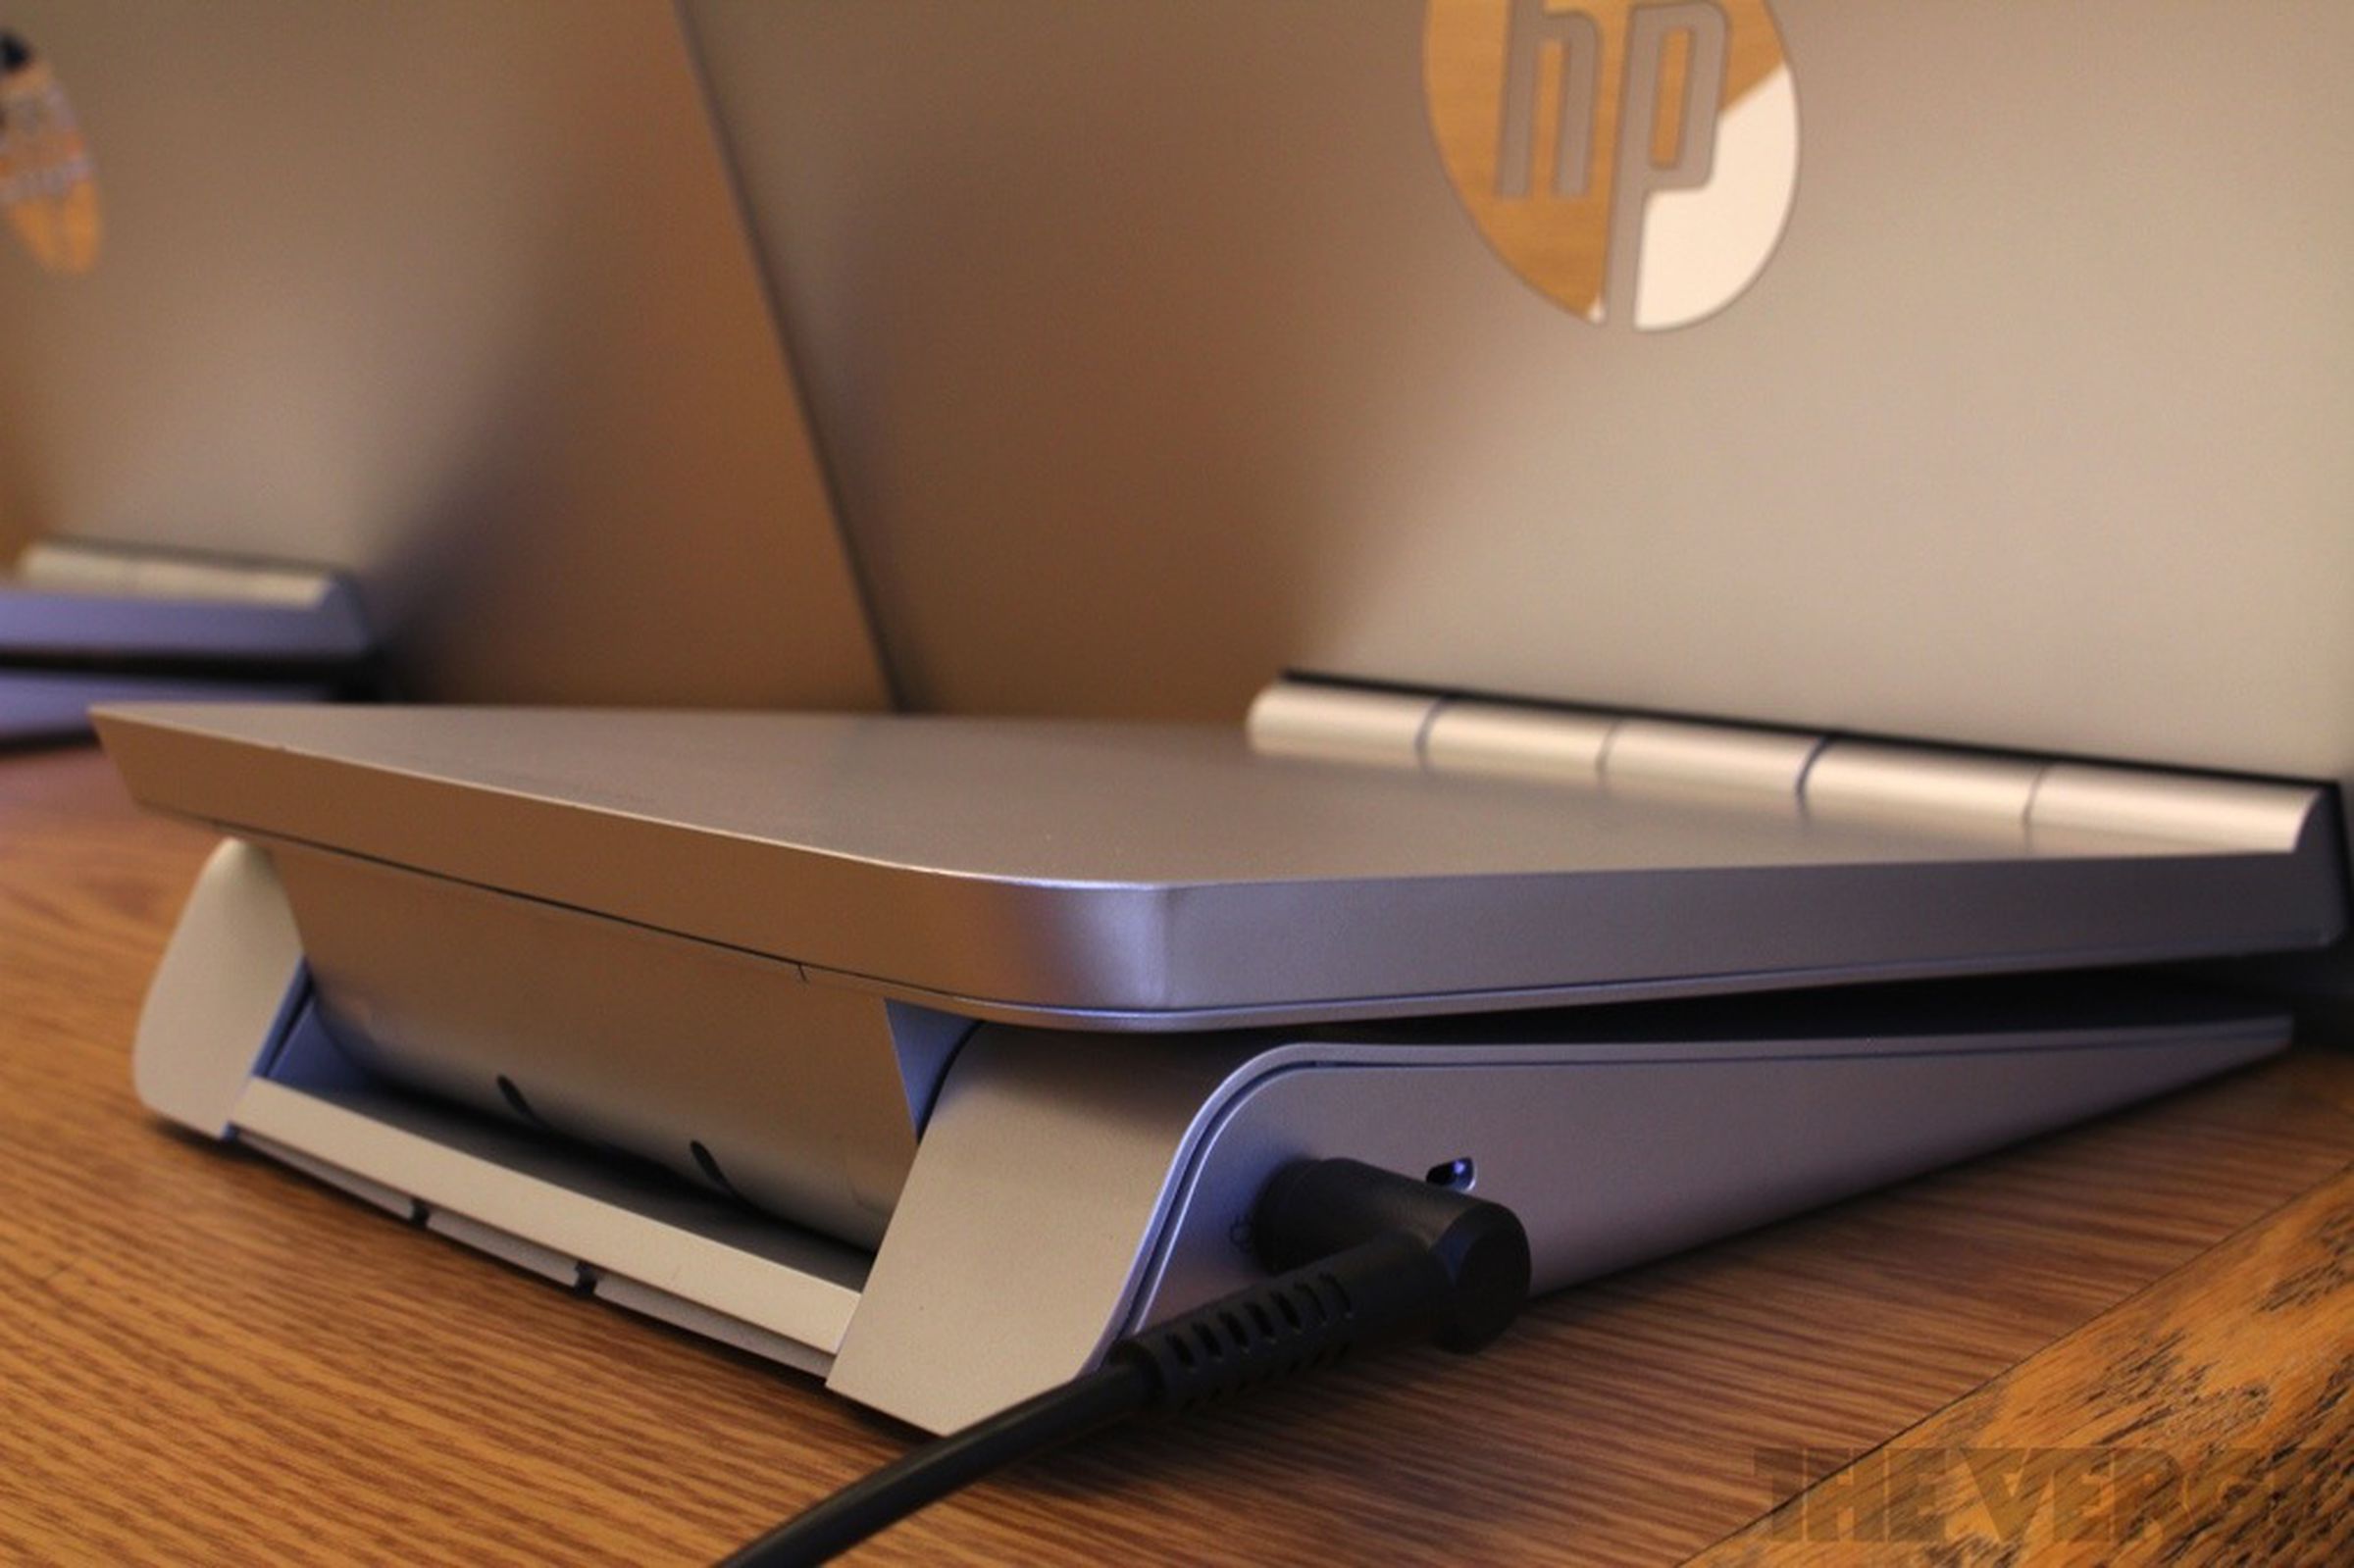 HP Envy 23 Recline and Envy 27 Recline hands-on pictures